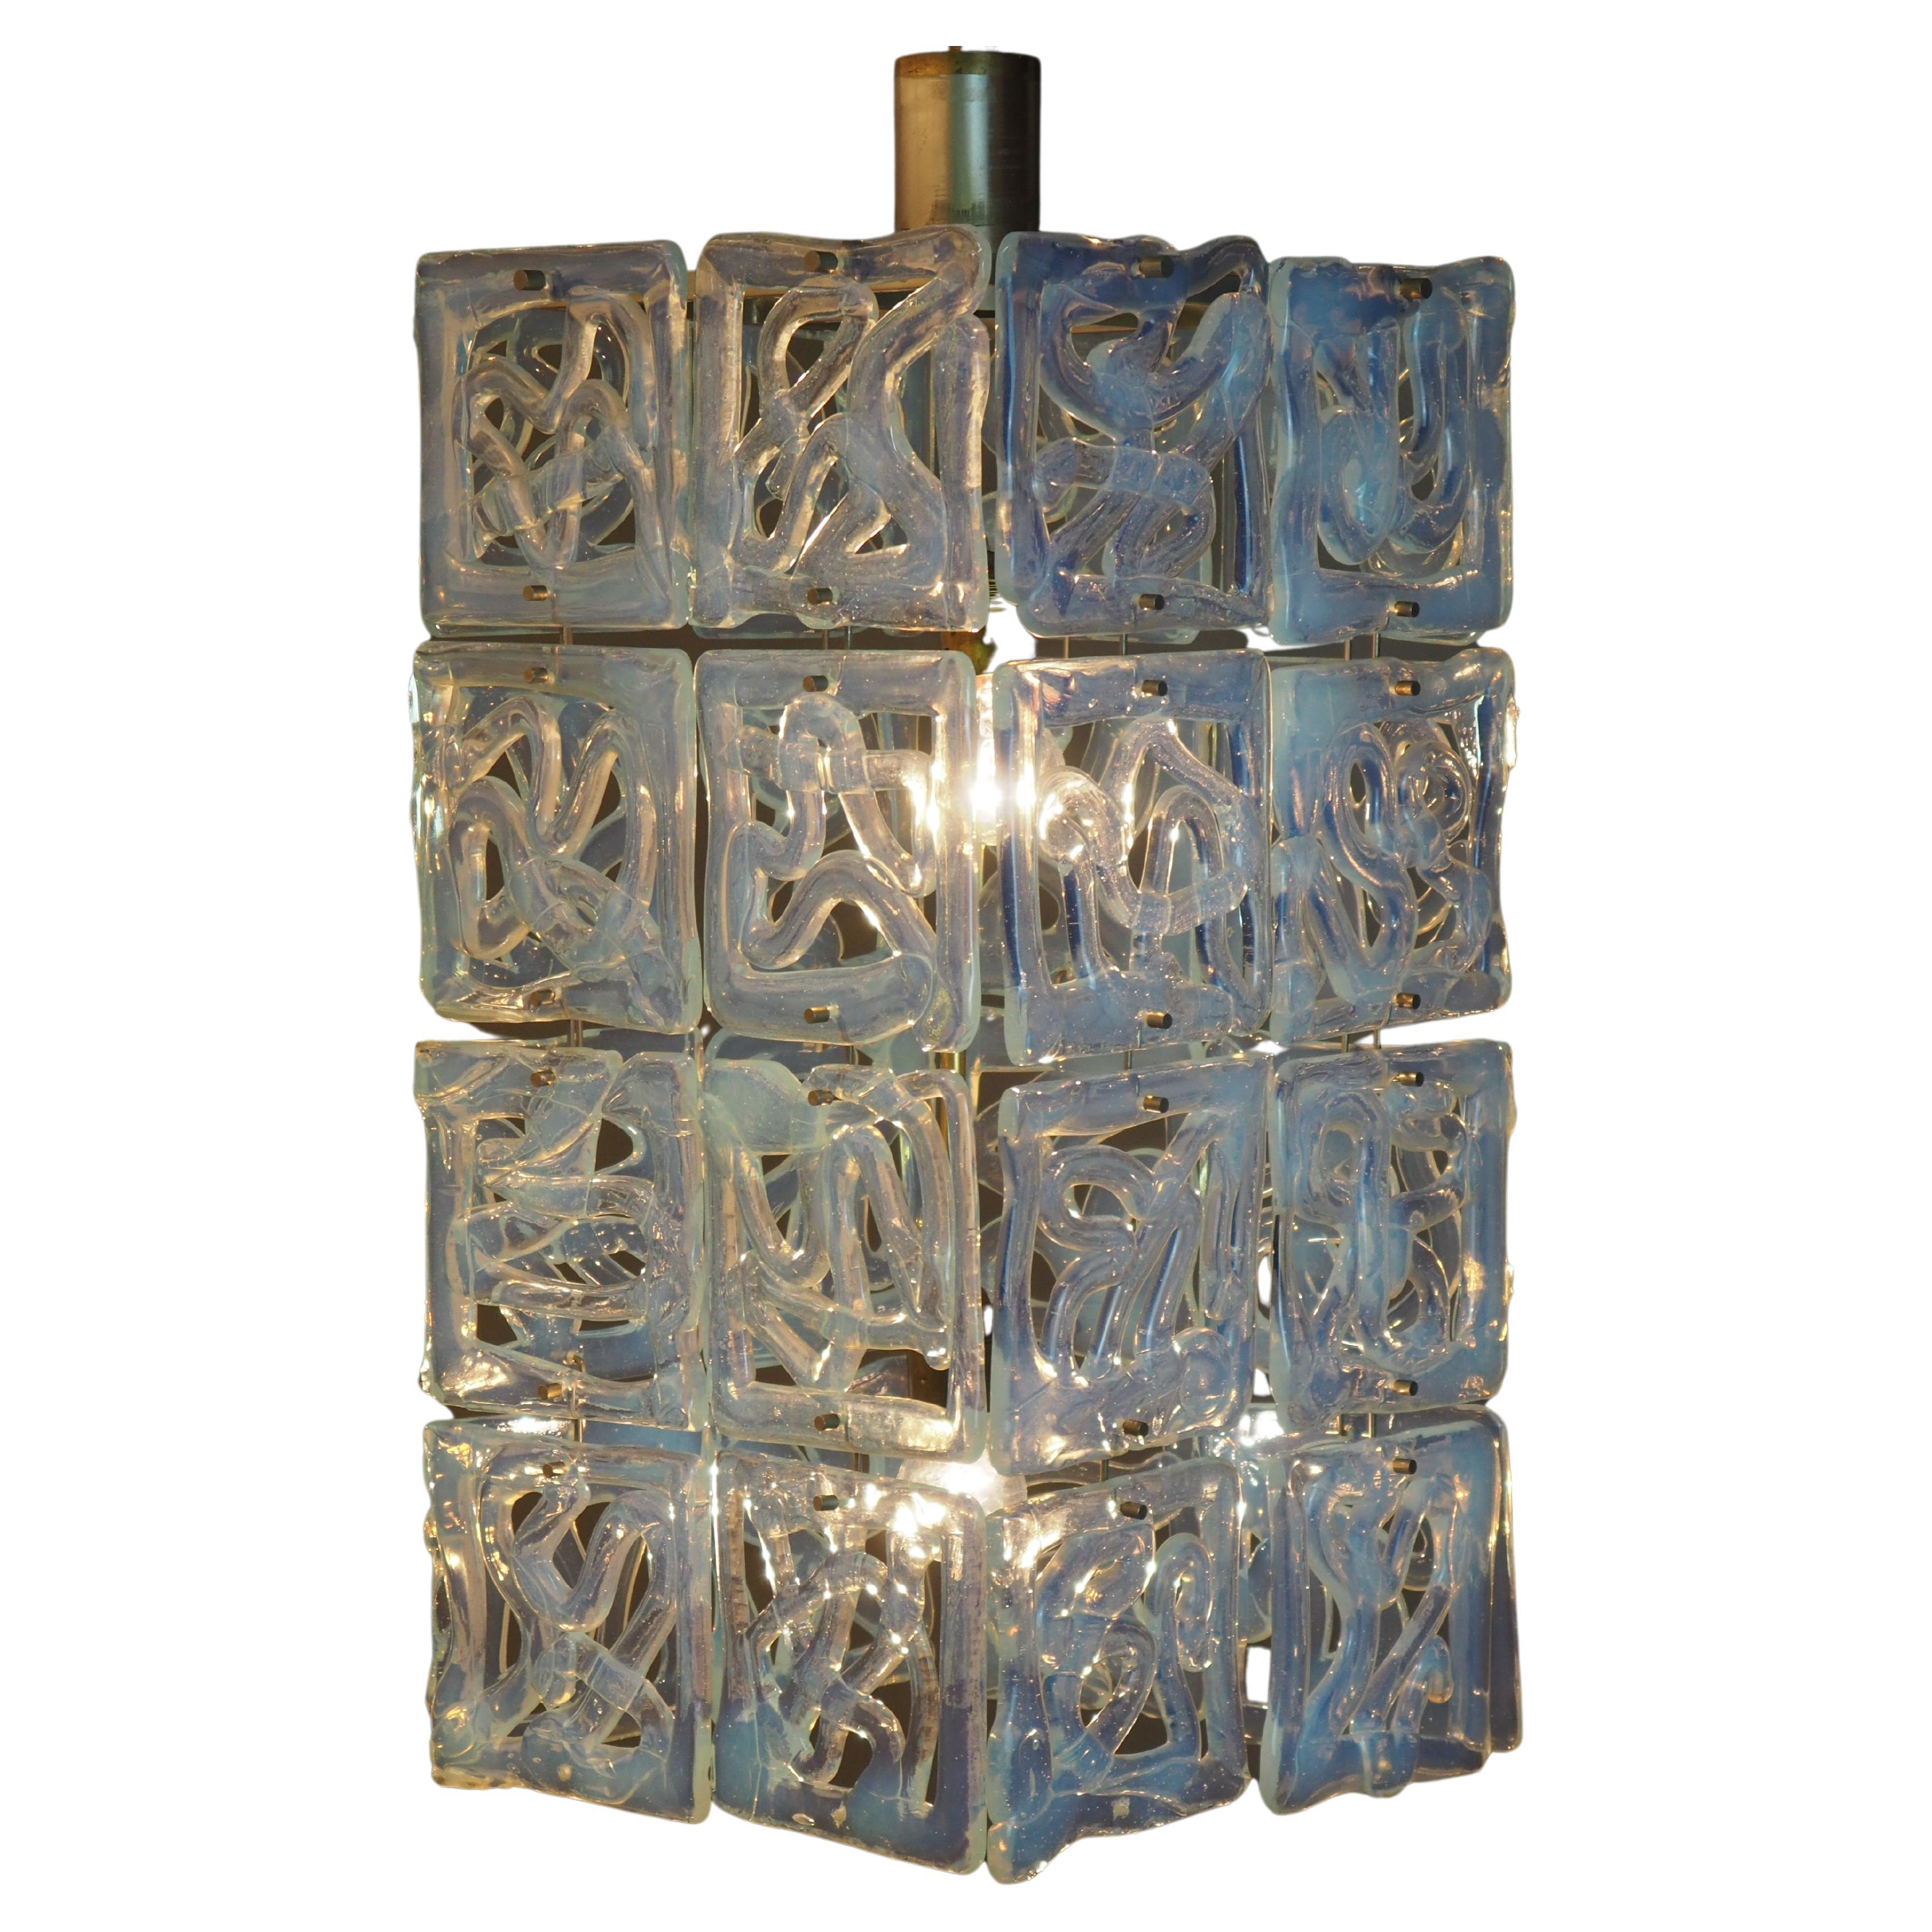 An extraordinary and very rare midcentury Murano glass pendant attributed to Carlo Nason for Mazzega, Italy, circa 1960s.
This amazing chandelier was handcrafted of chromed brass and 32 x large (5.9 inch x 5.9 inch) opalescent square glass